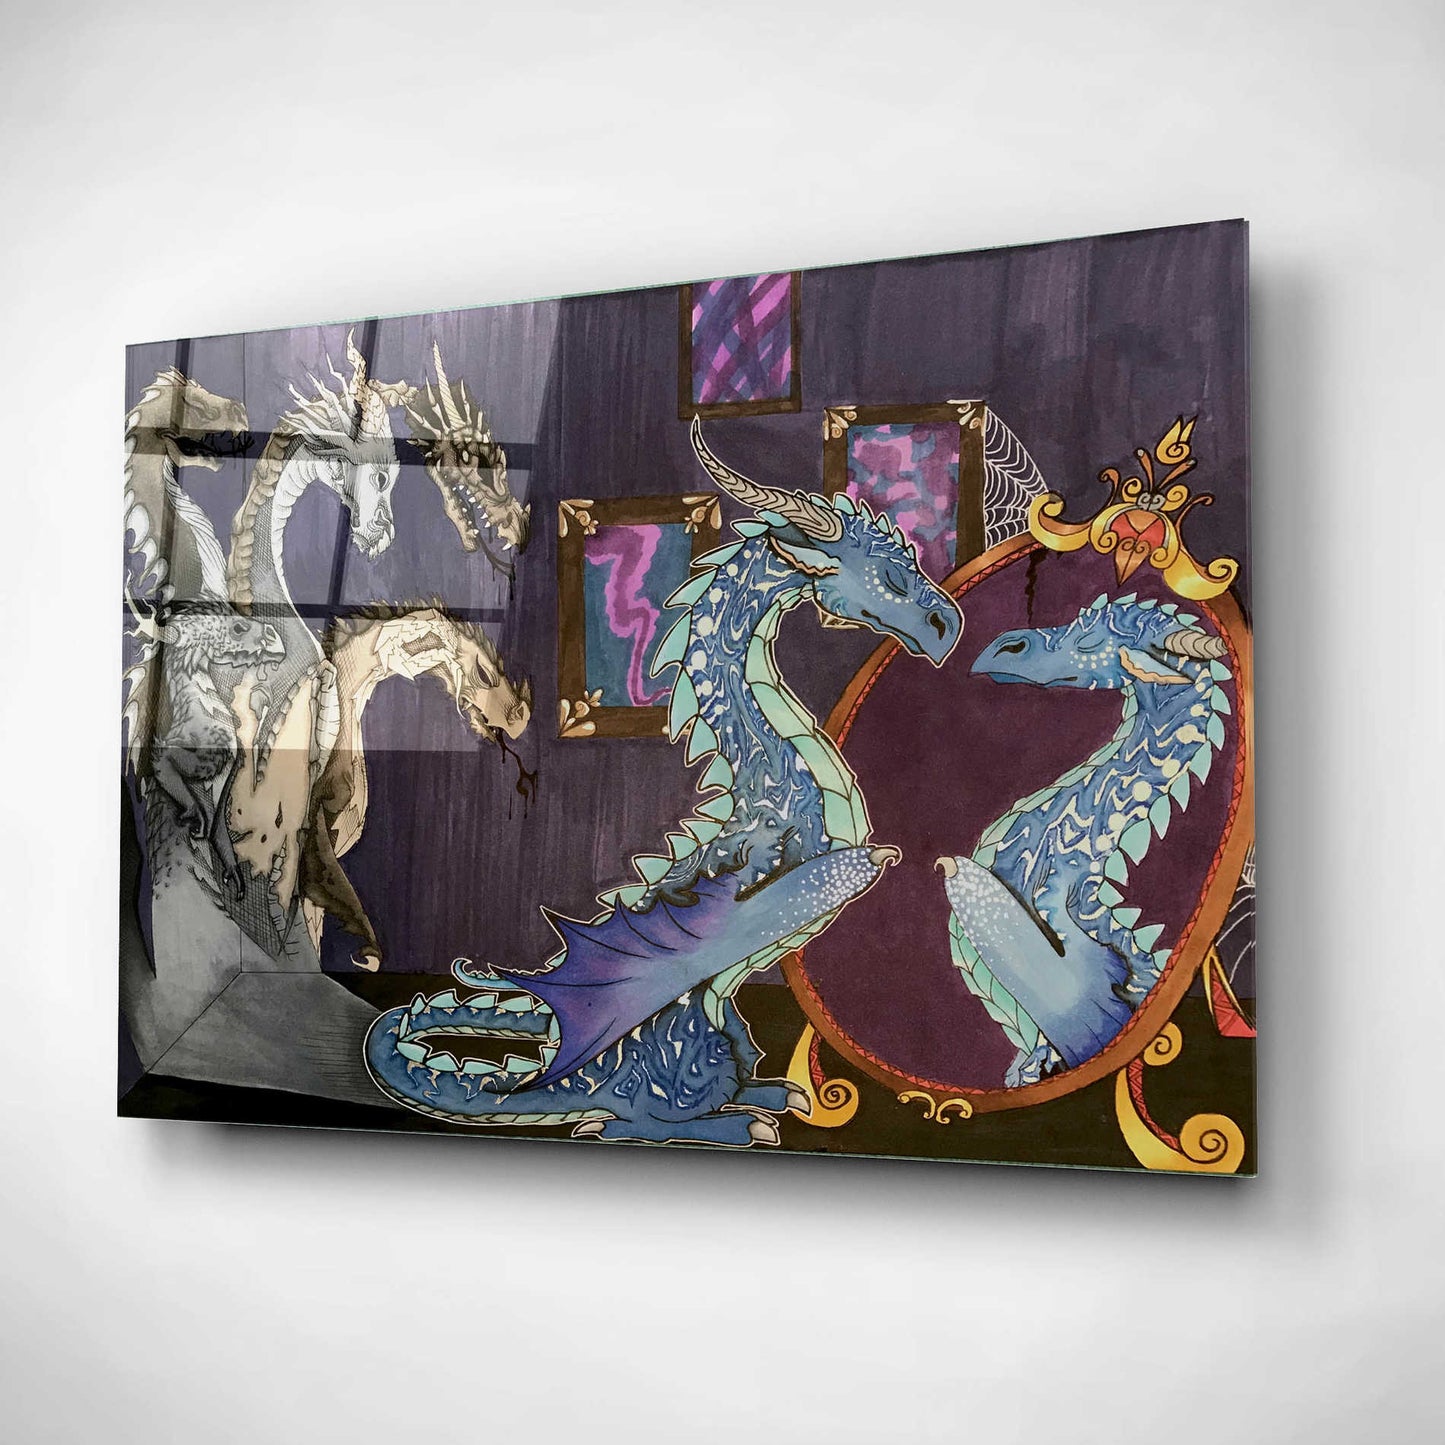 Epic Art 'Dragon in the Mirror' by Avery Multer, Acrylic Glass Wall Art,16x12